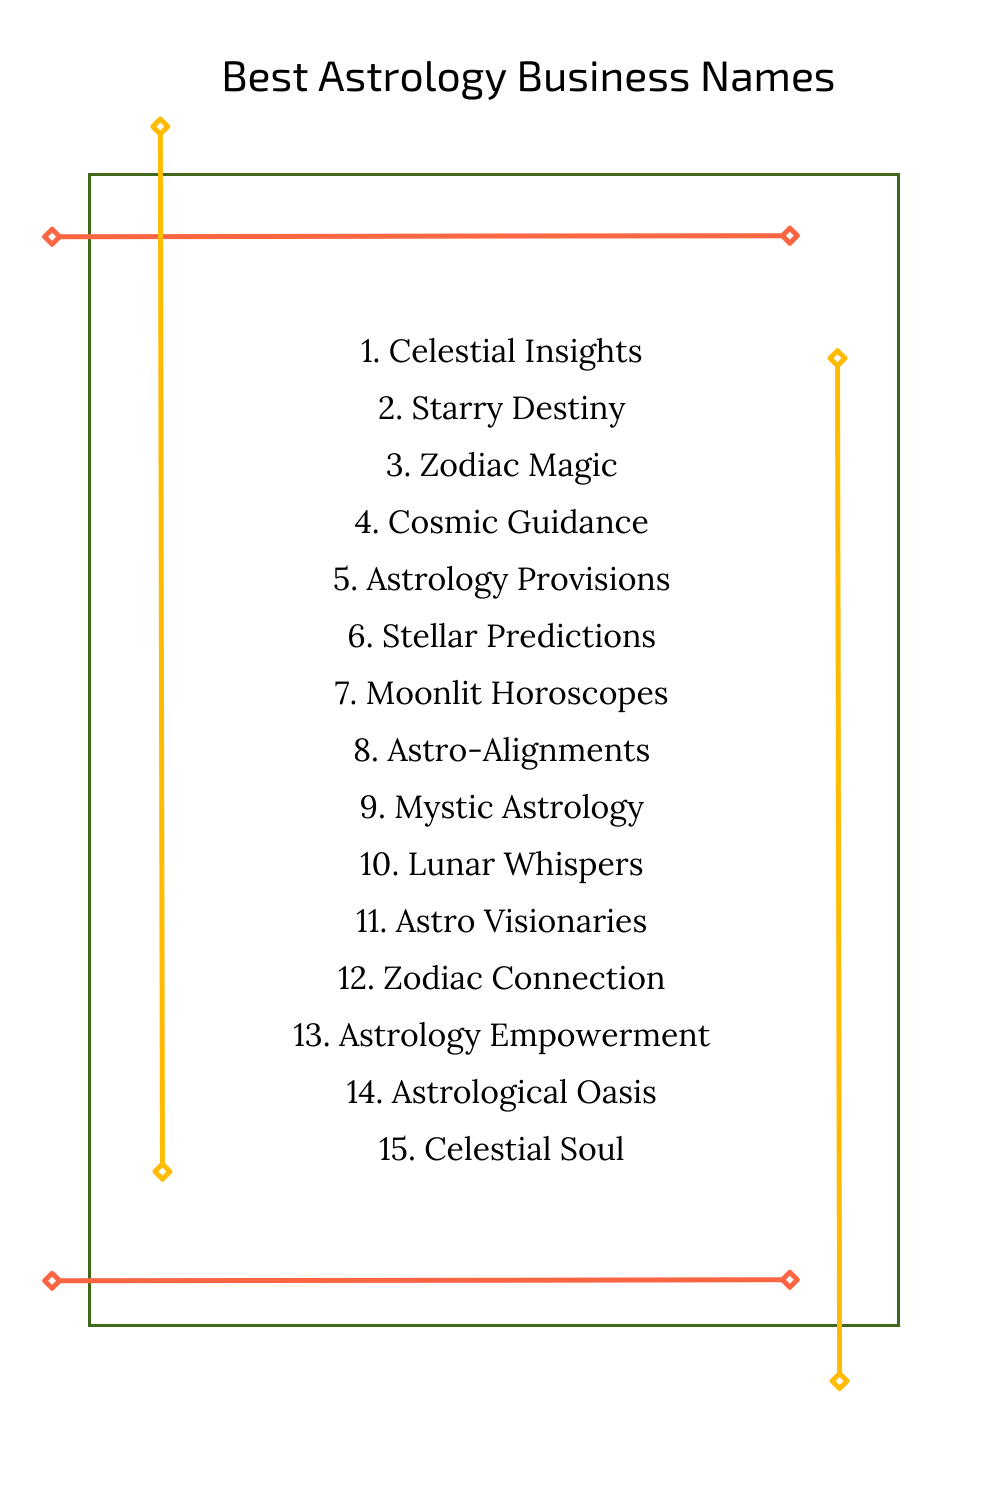 Best Astrology Business Names